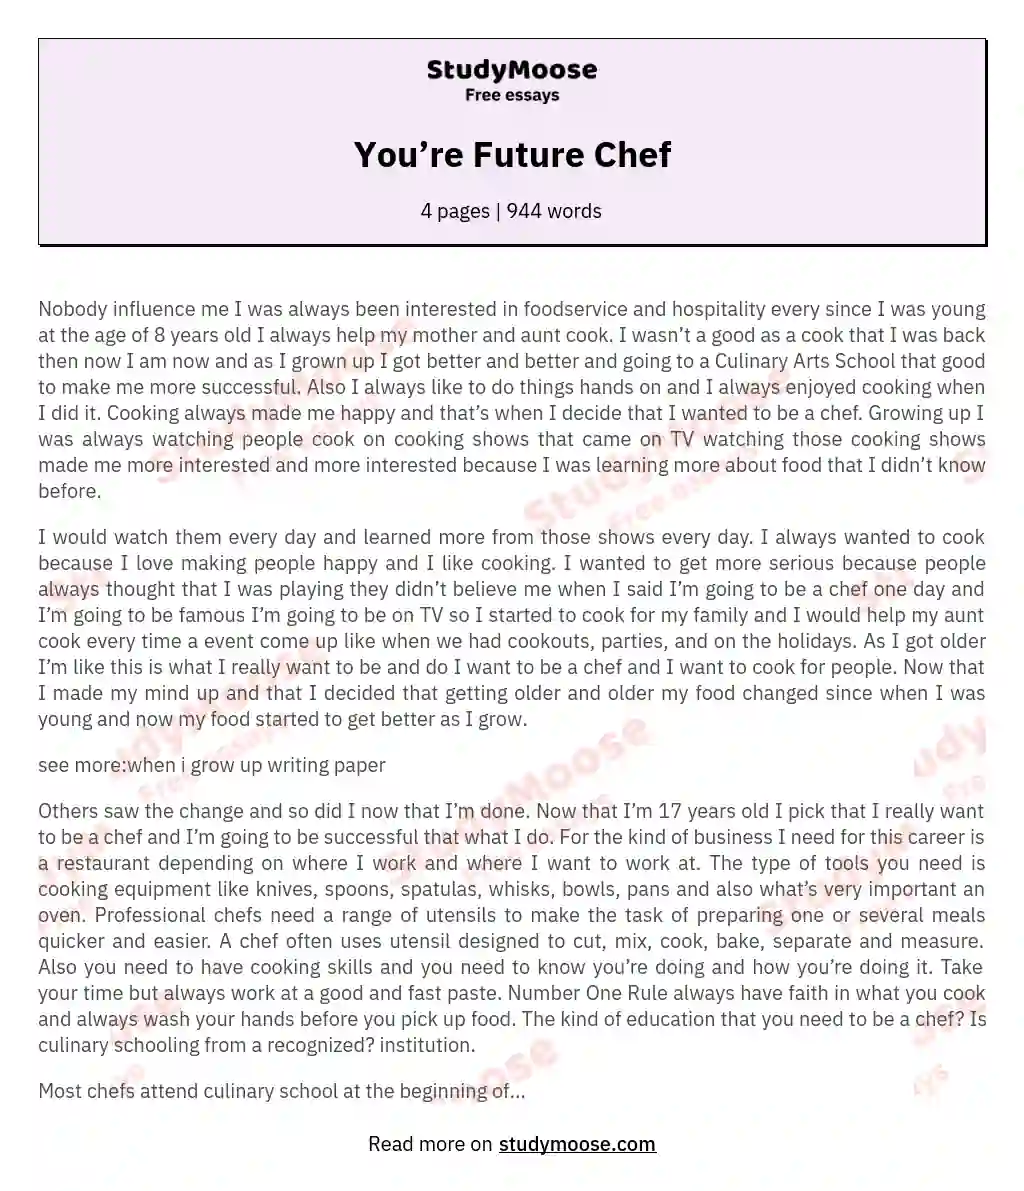 10 years from now i will be a chef essay